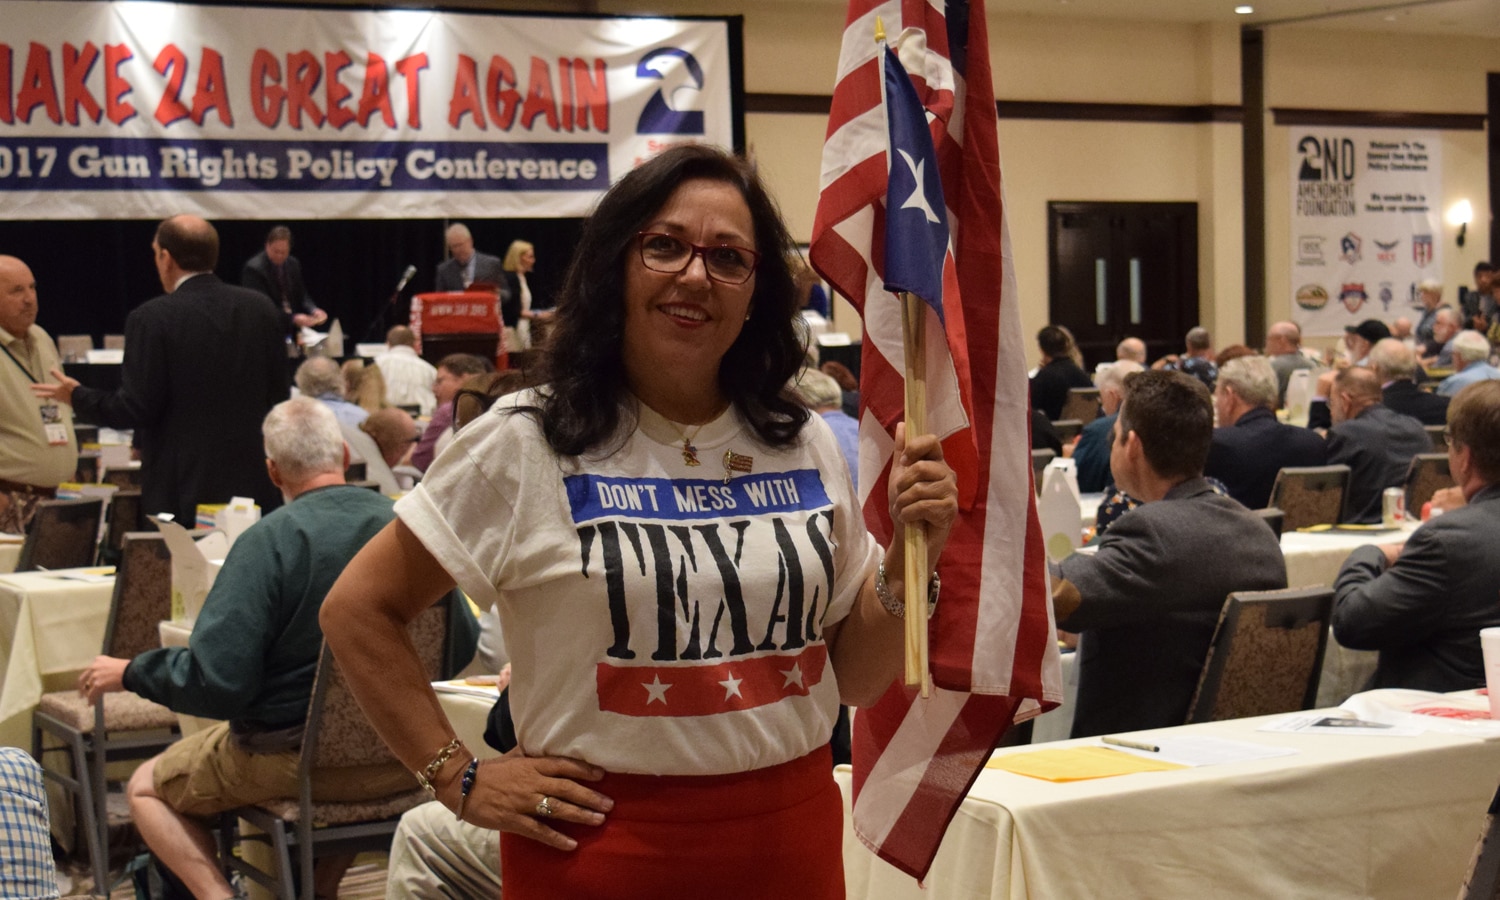 Rose Wilcox, of Plano, Texas, attends the Gun Rights Policy Conference for the first time in support of the Second Amendment. (Photo: Christen Smith/Guns.com)